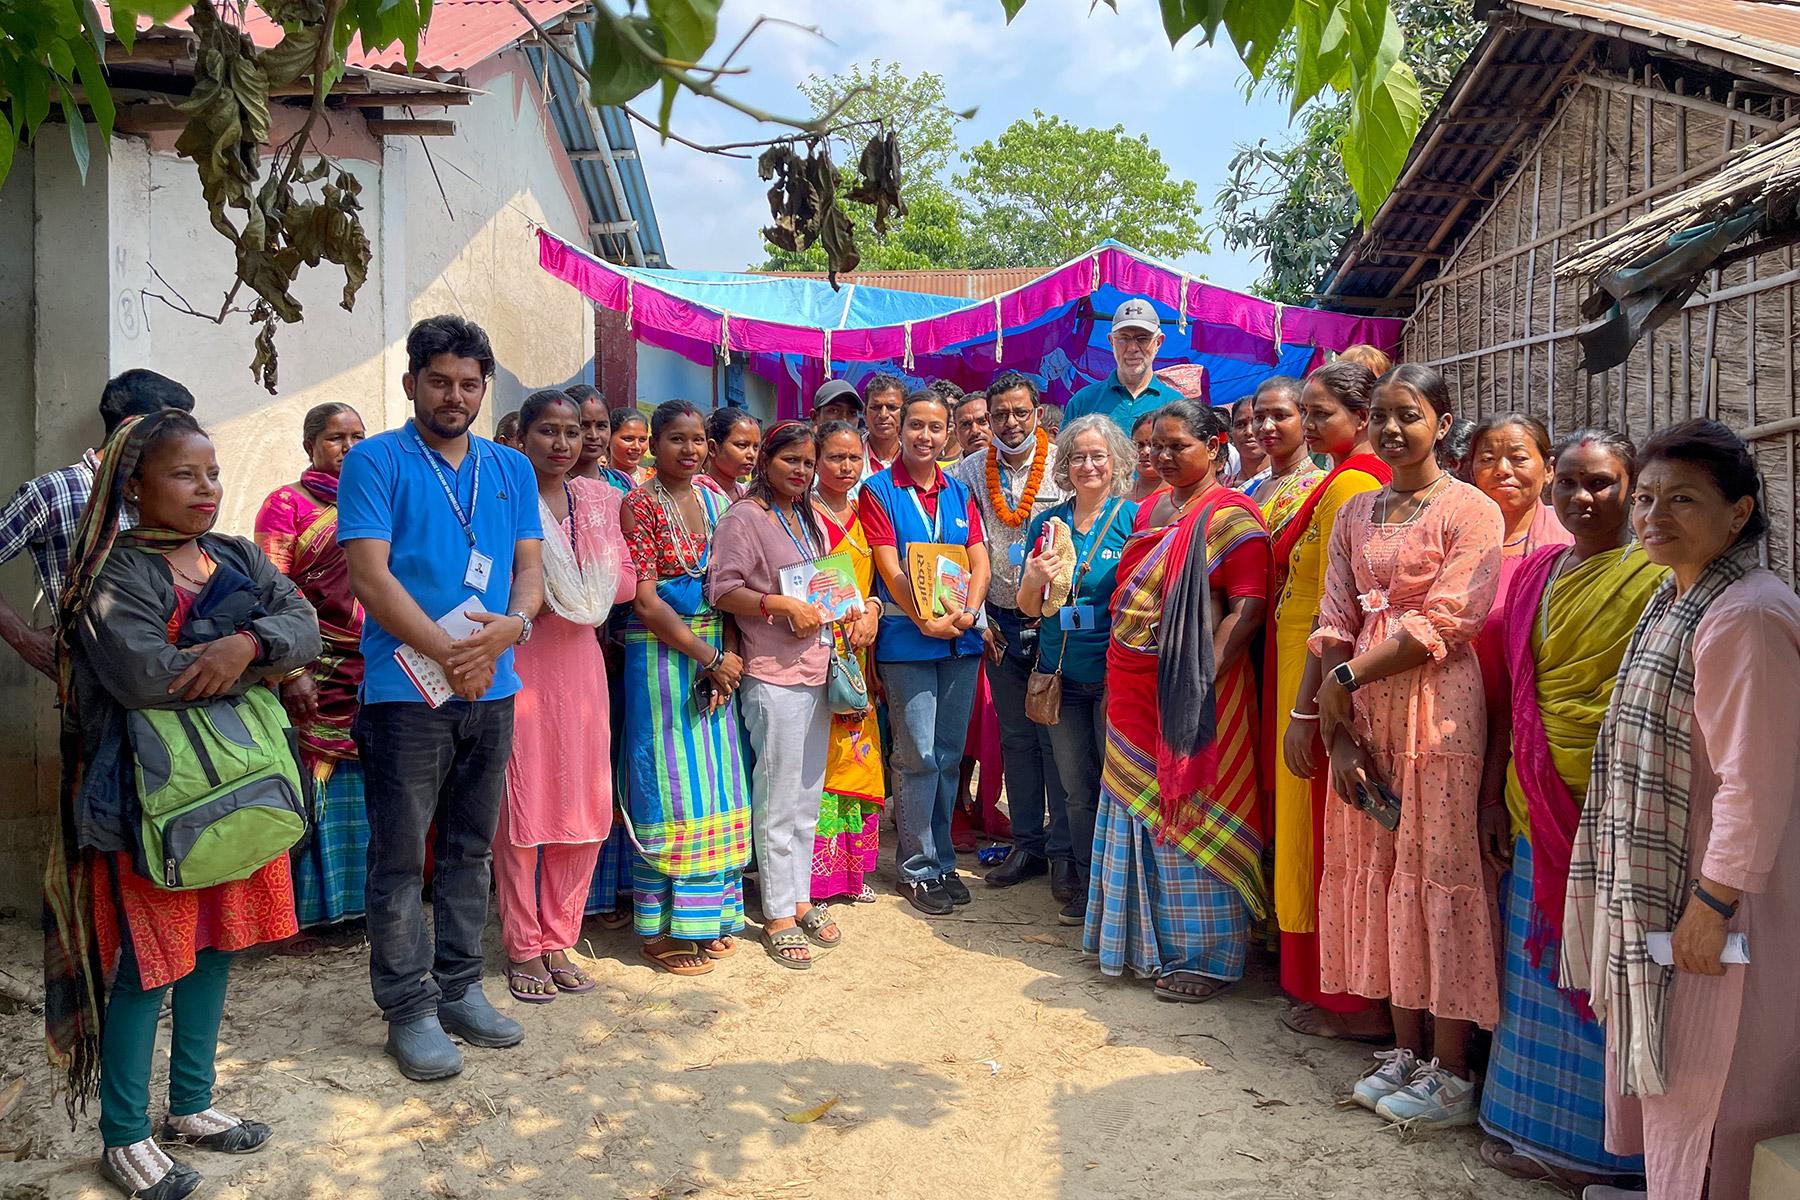 The LWF team and partners visit a community-owned cooperative focusing on business as well as social aspects of the community in Jhapa district. Photo: LWF/ Y. Gautam